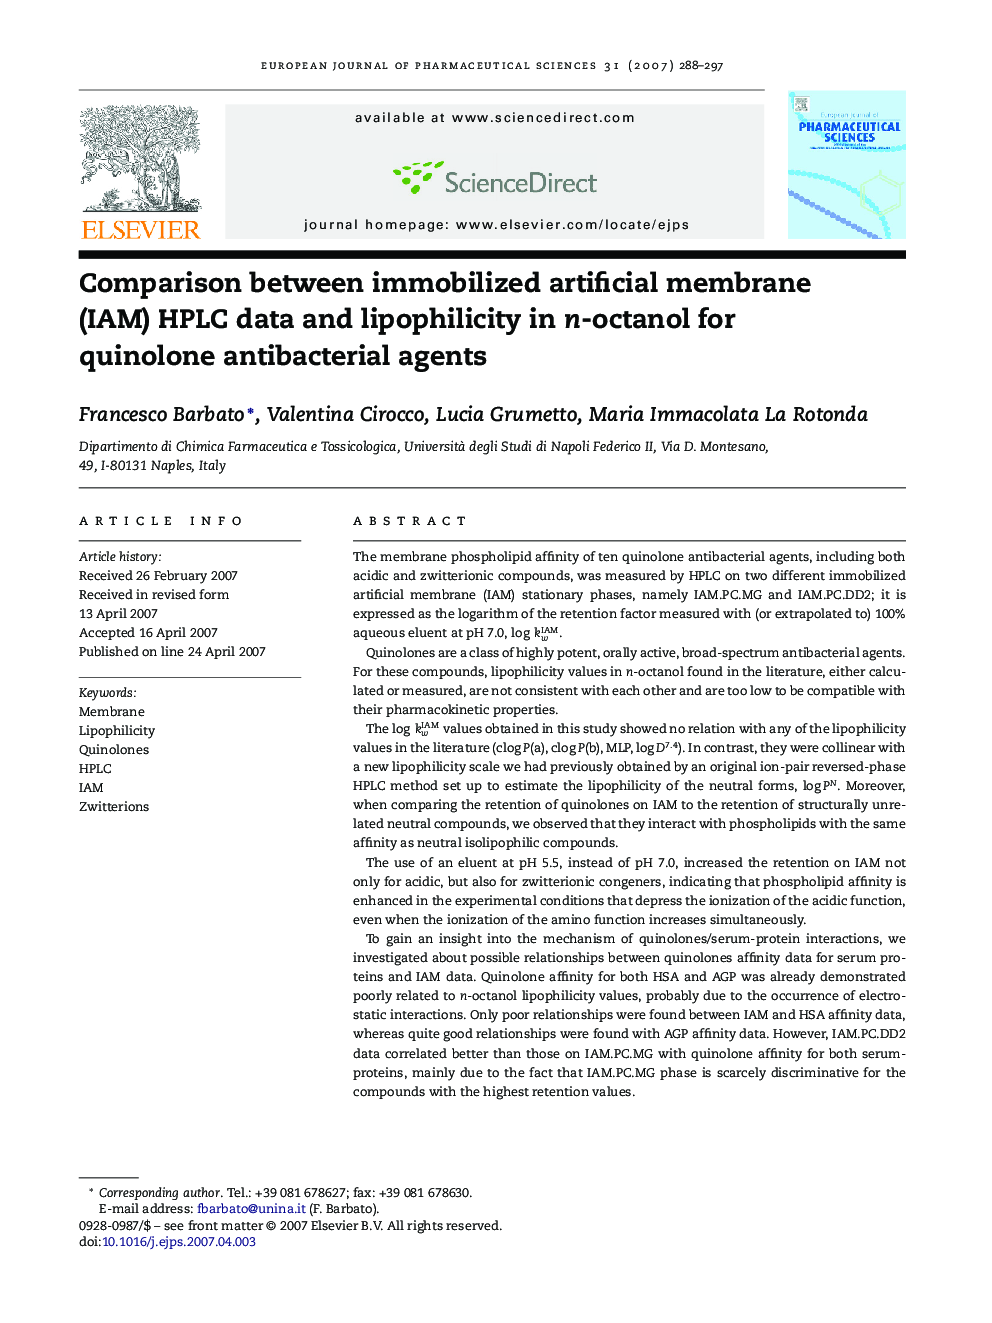 Comparison between immobilized artificial membrane (IAM) HPLC data and lipophilicity in n-octanol for quinolone antibacterial agents